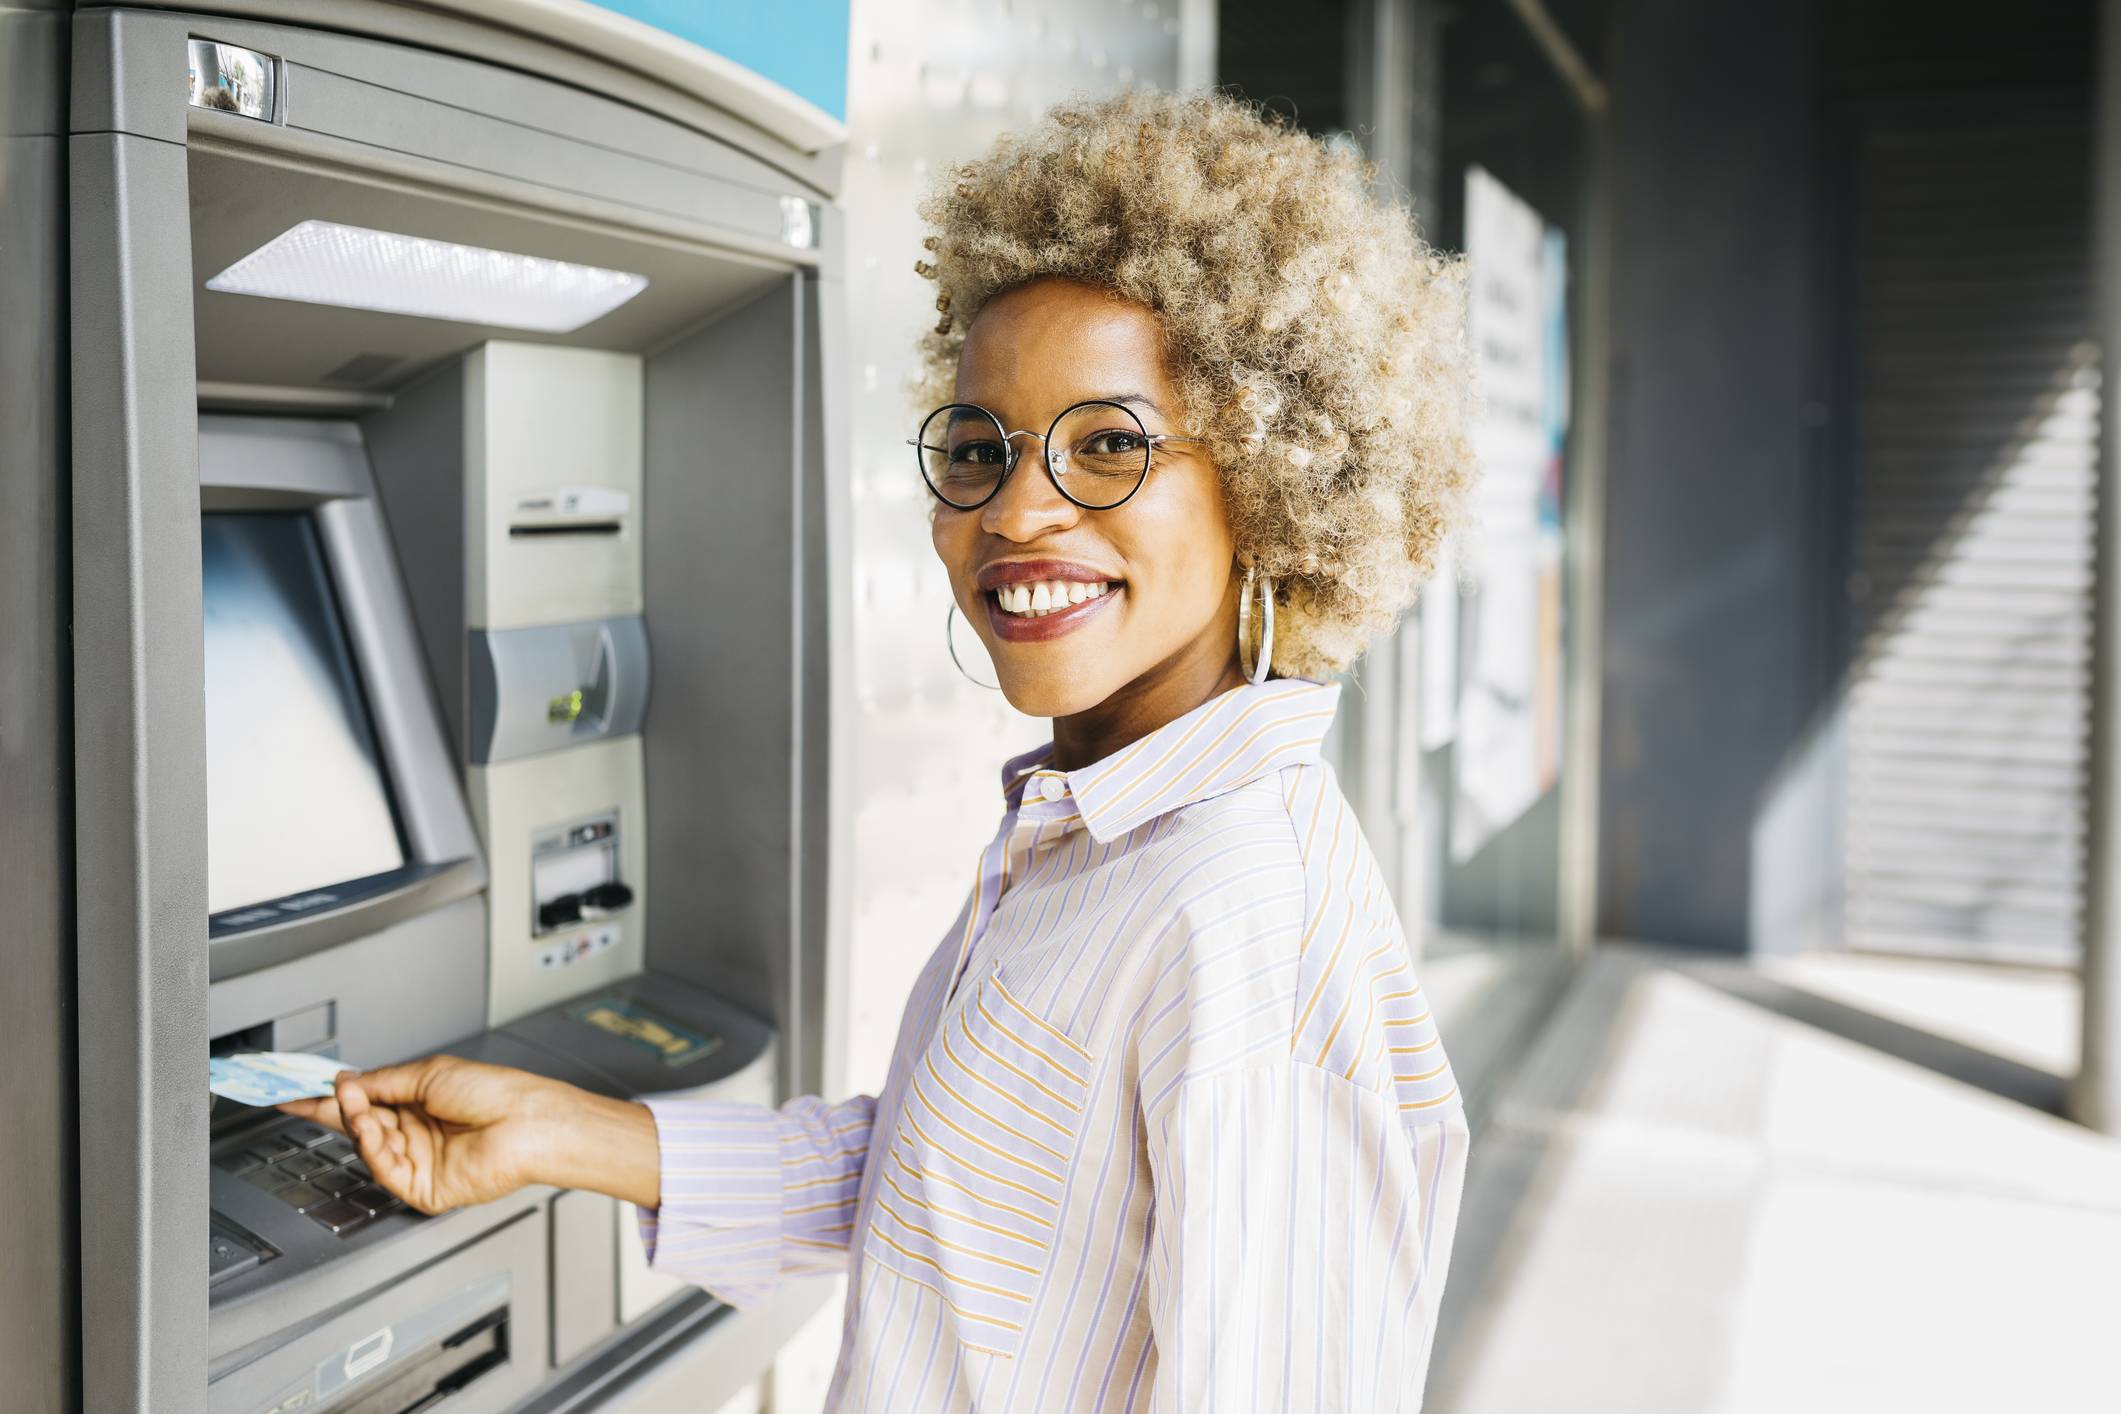 Afro-Latina woman with afro hair, withdrawing money from the ATM.